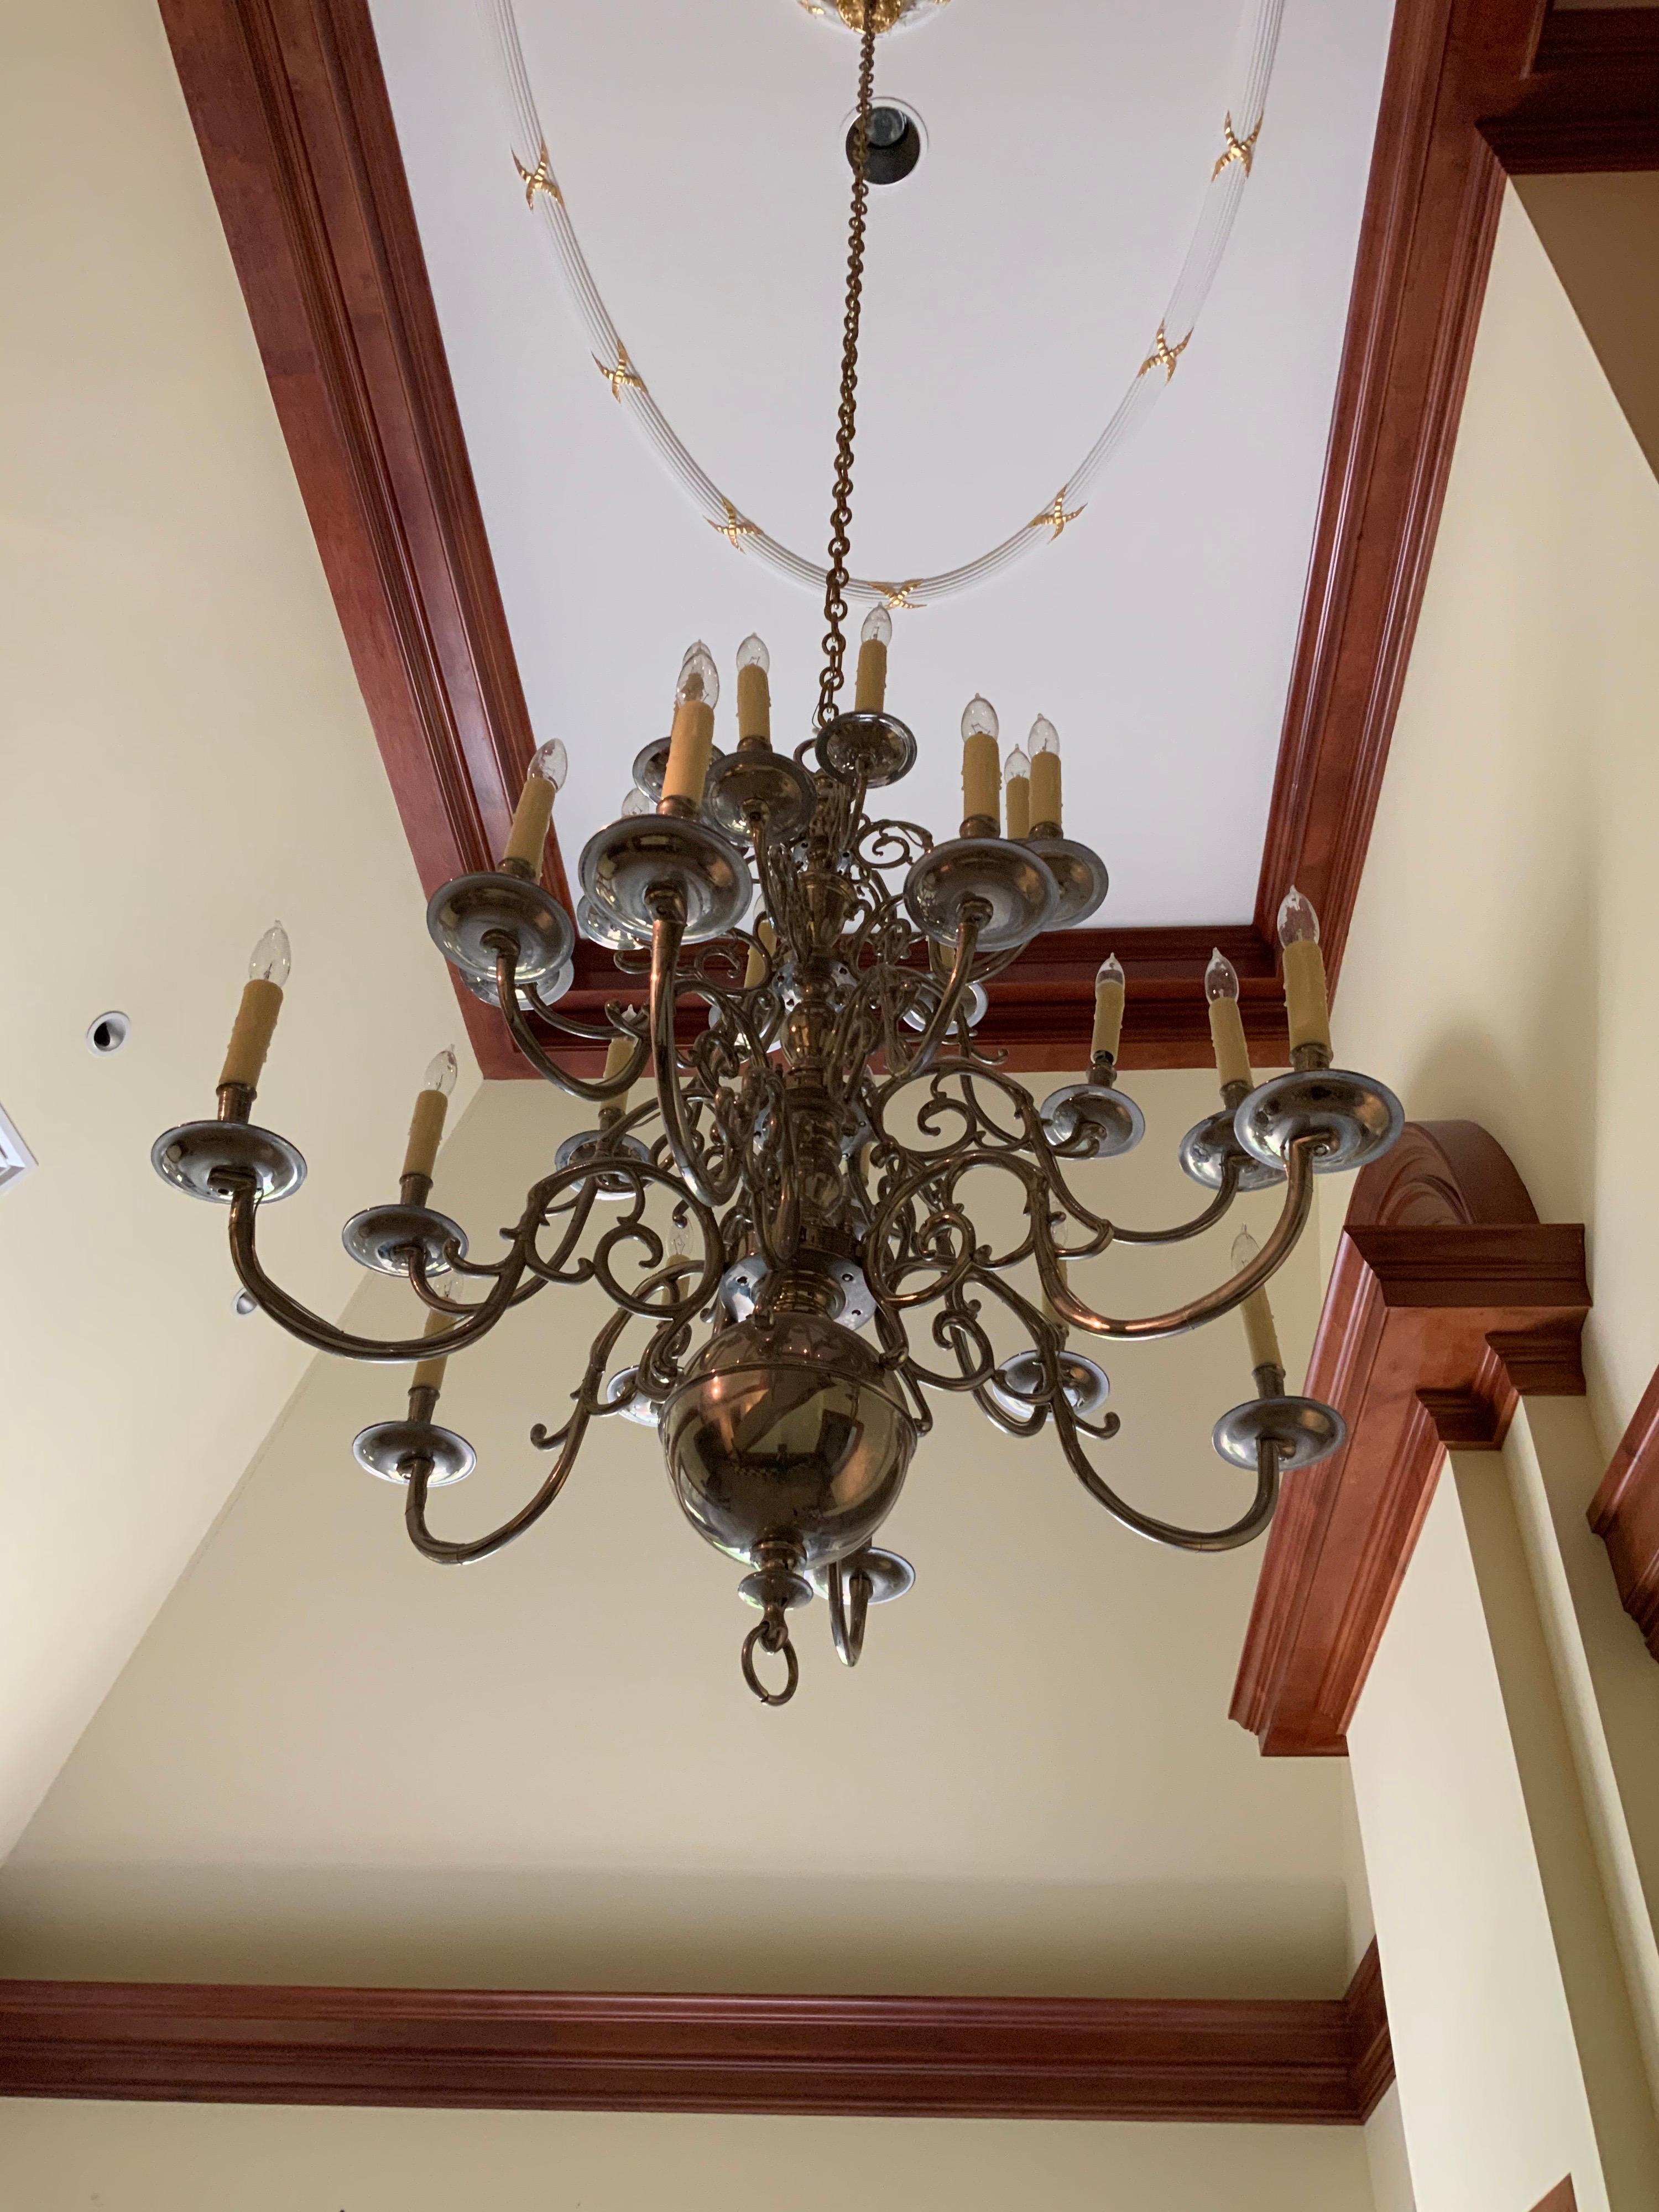 This German silver chandelier origins from France.

19th century period.